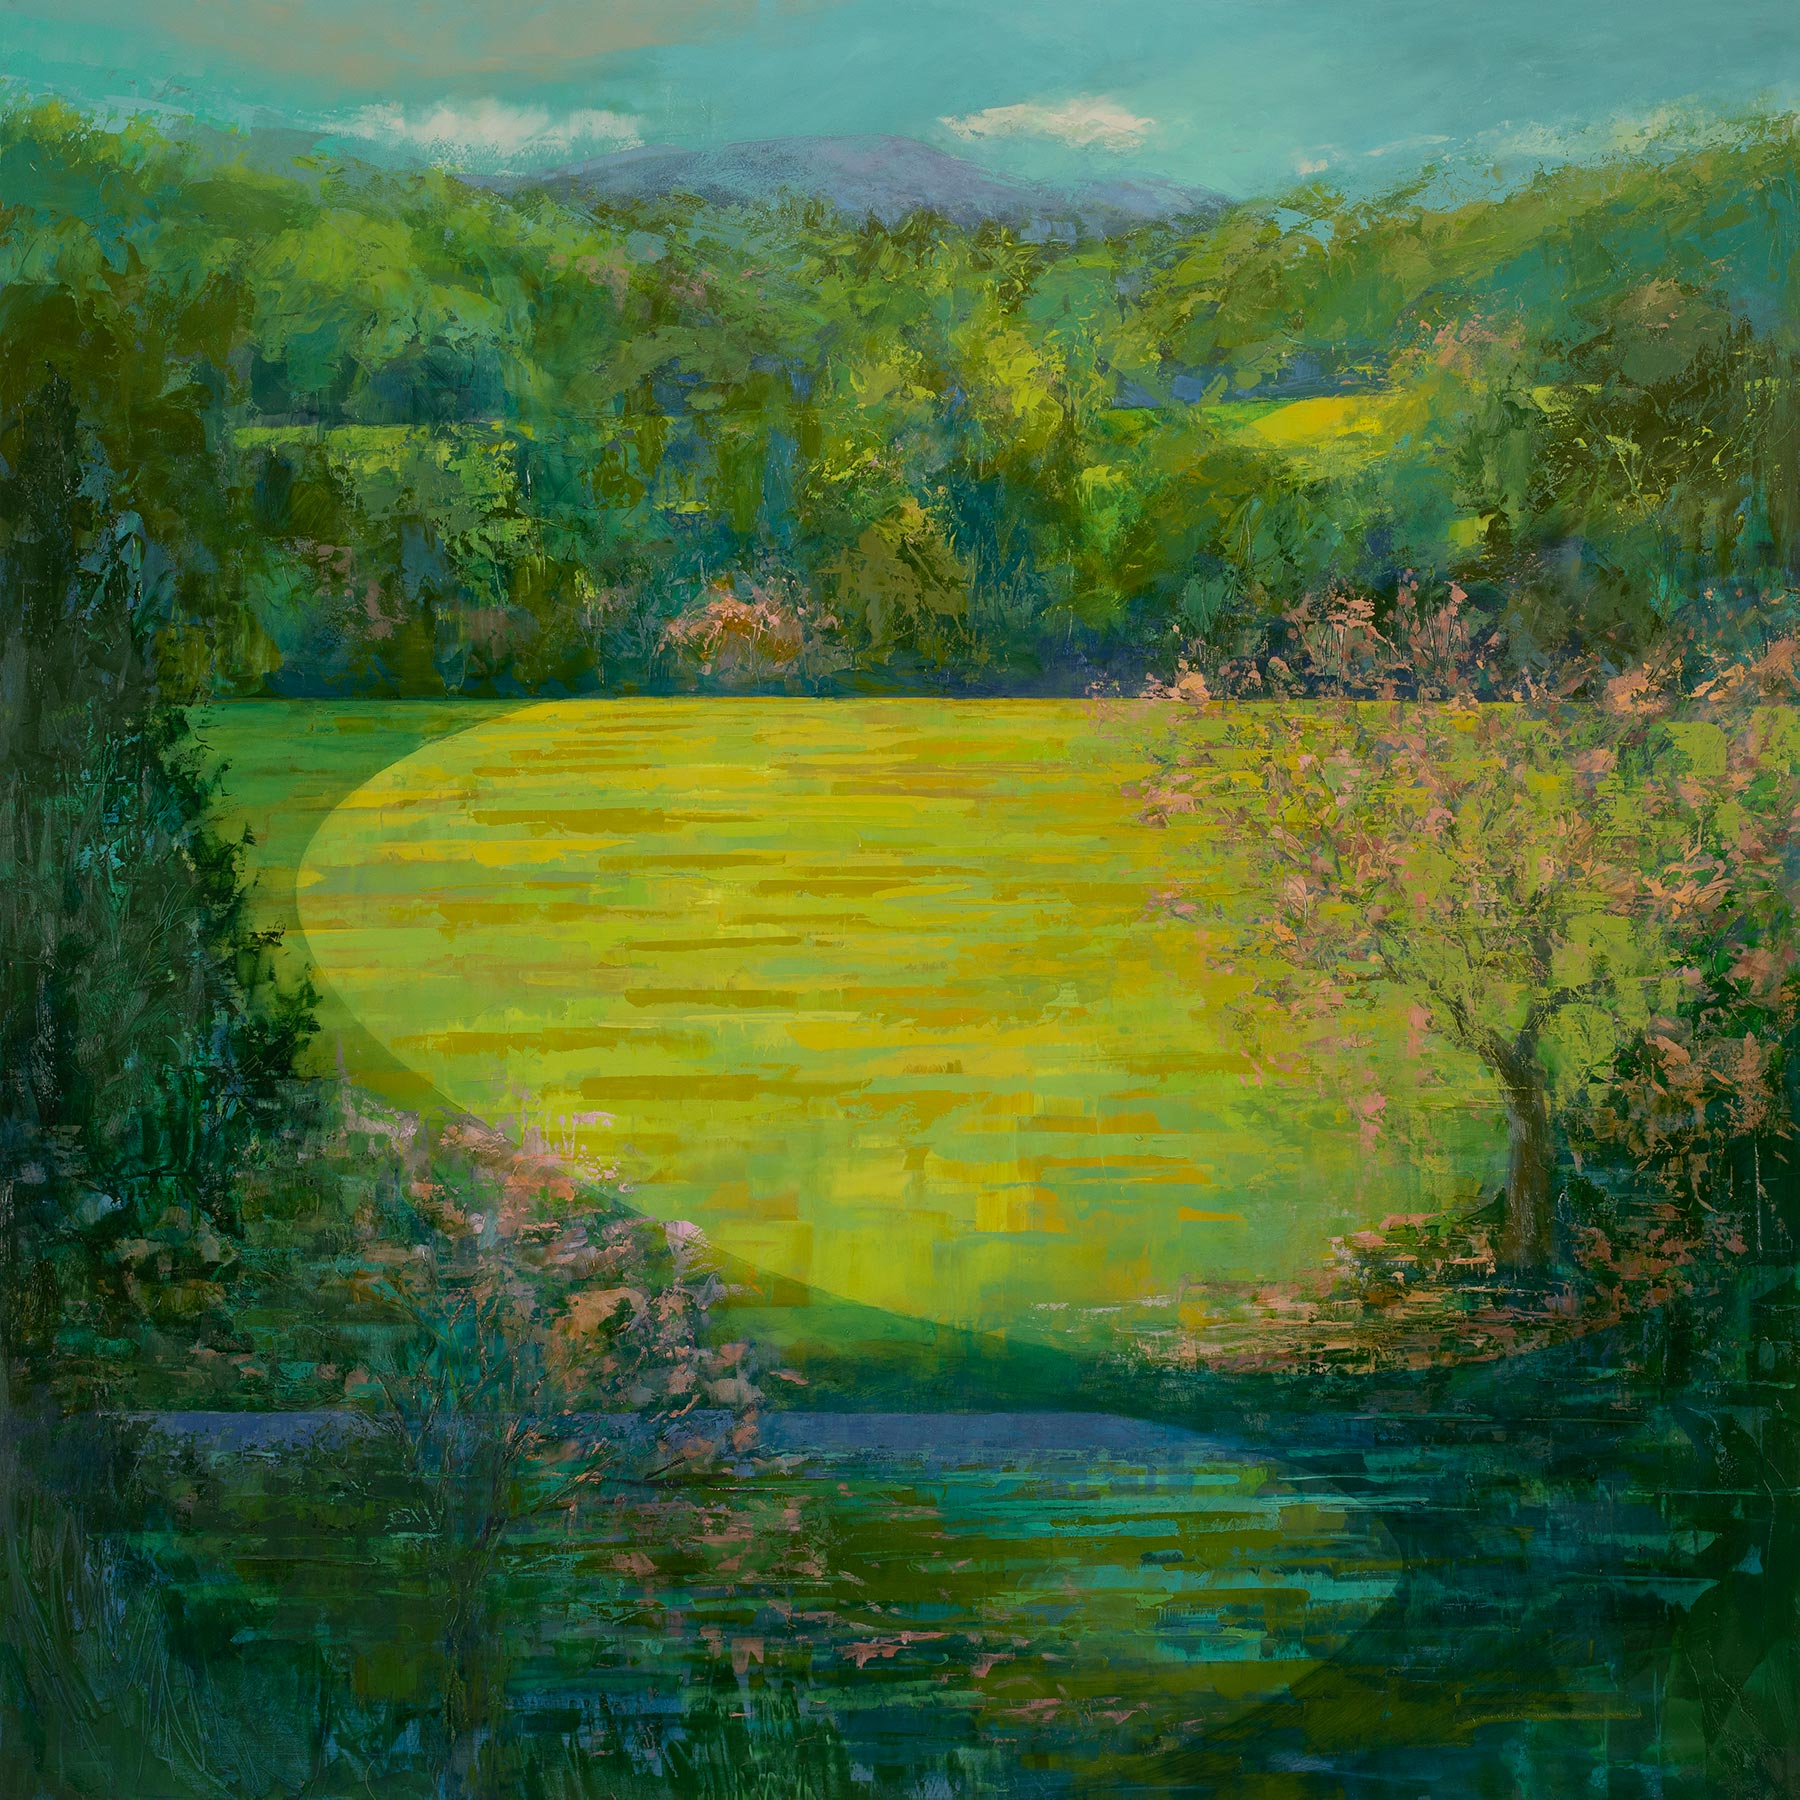 View from the Ridge: Arrival, oil on panel, 30 x 30 inches, 2020, SOLD